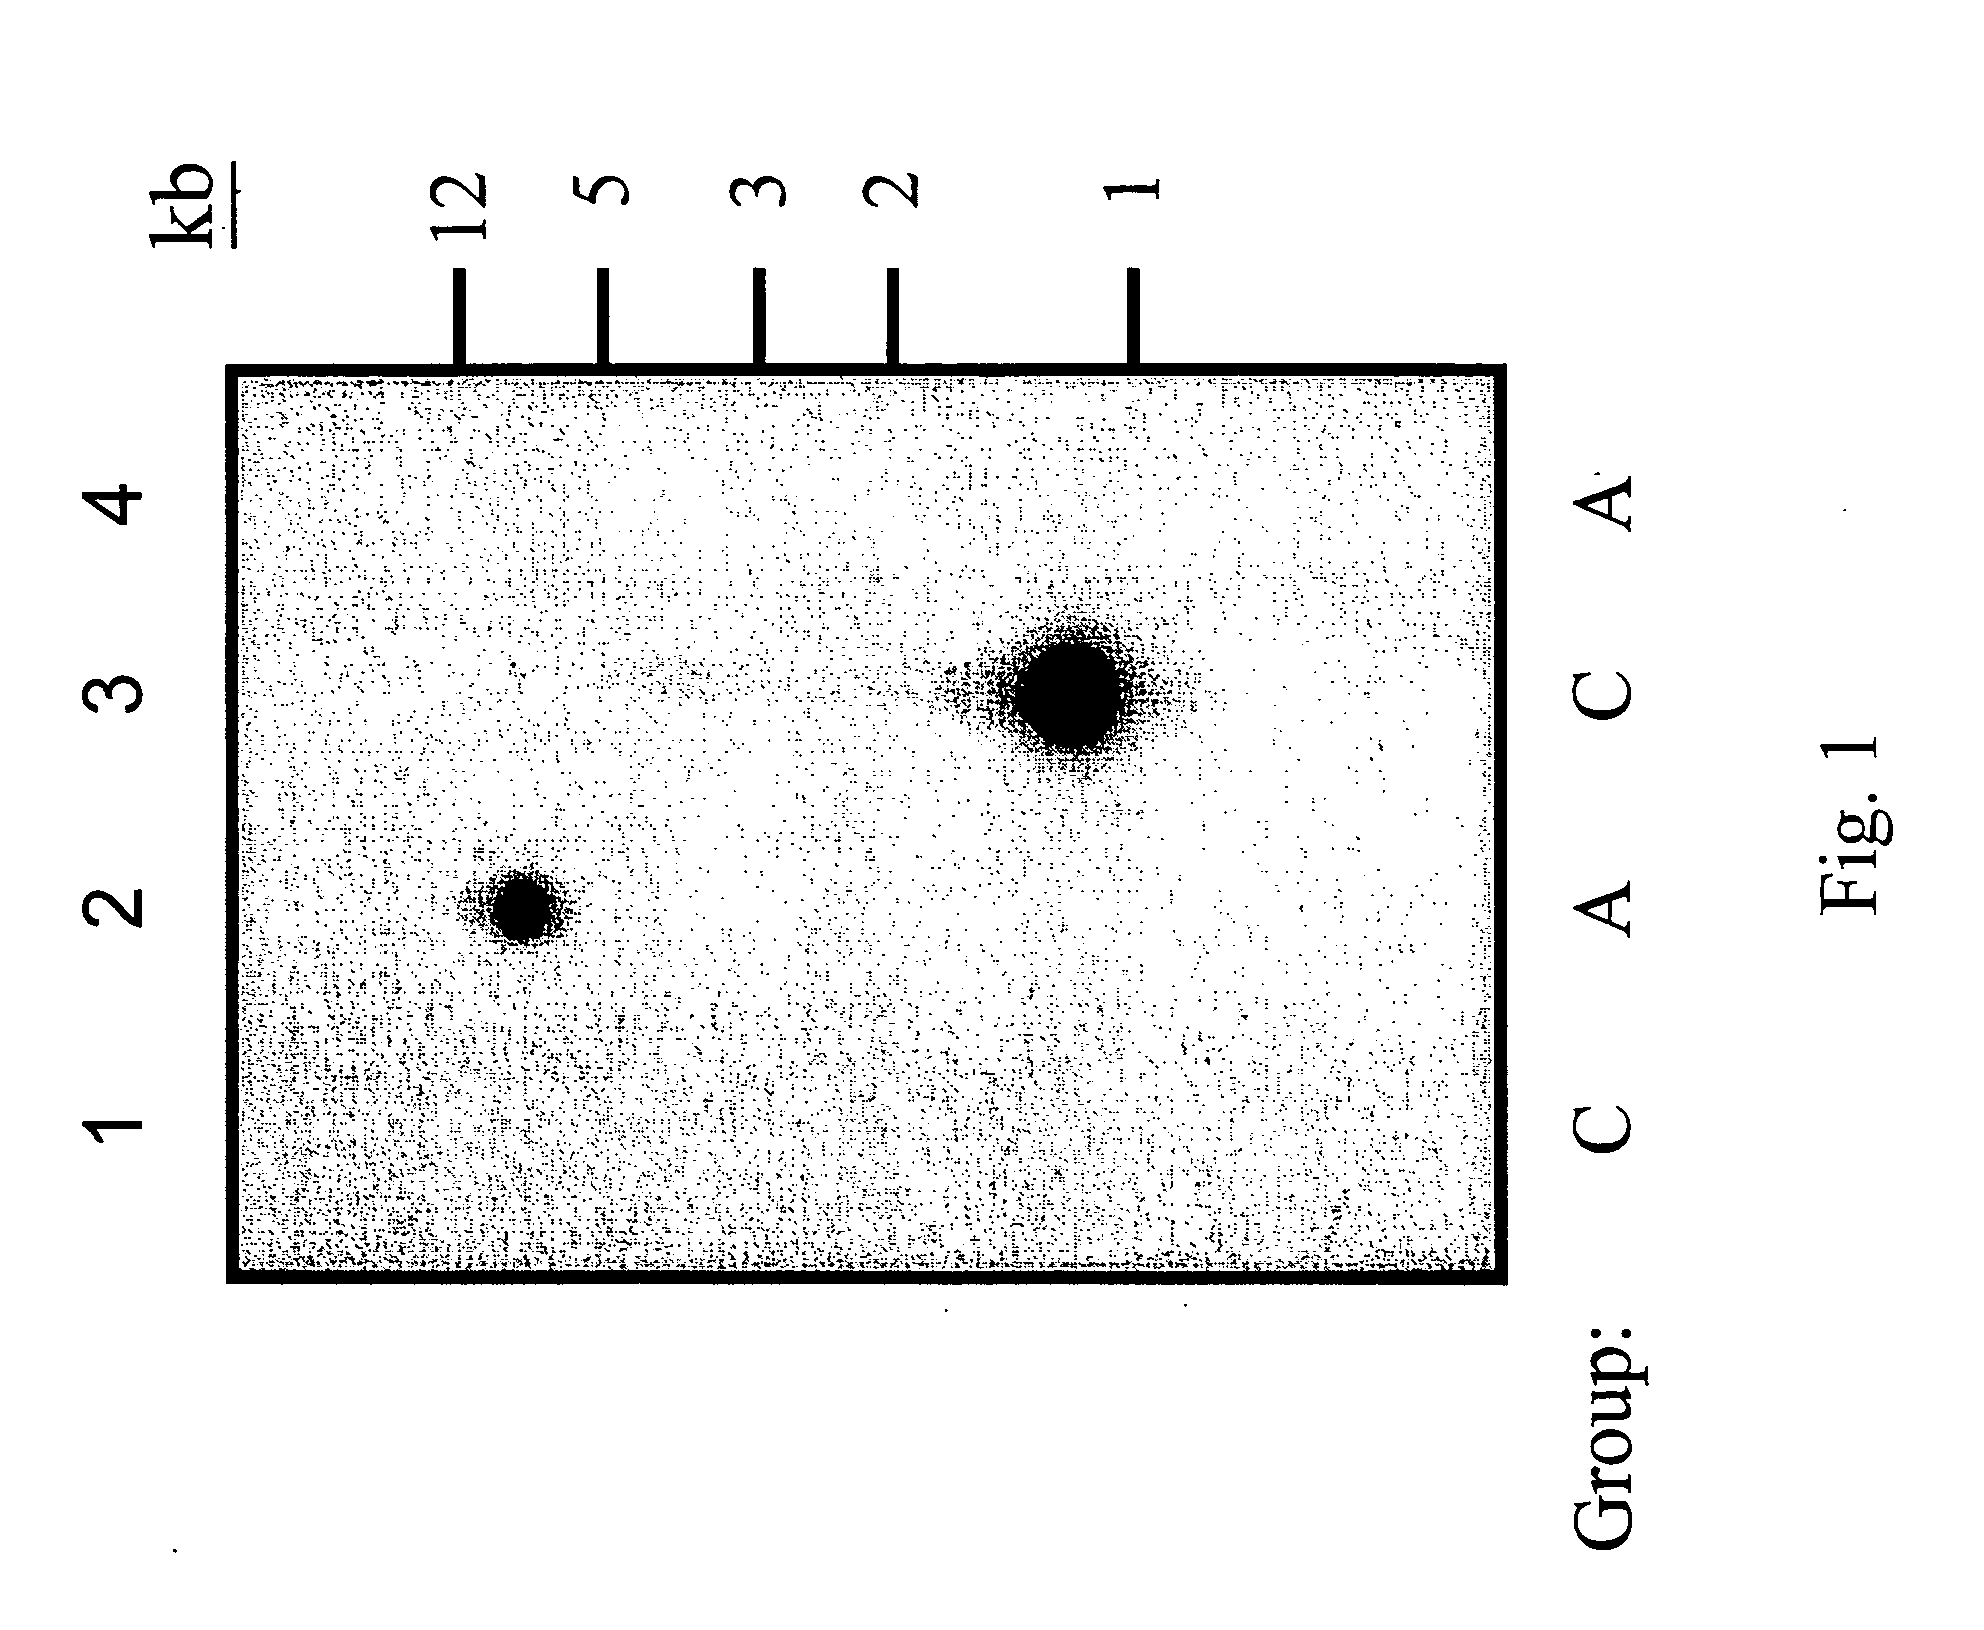 Methods of producing hyaluronic acid using a recombinant hyaluronan synthase gene